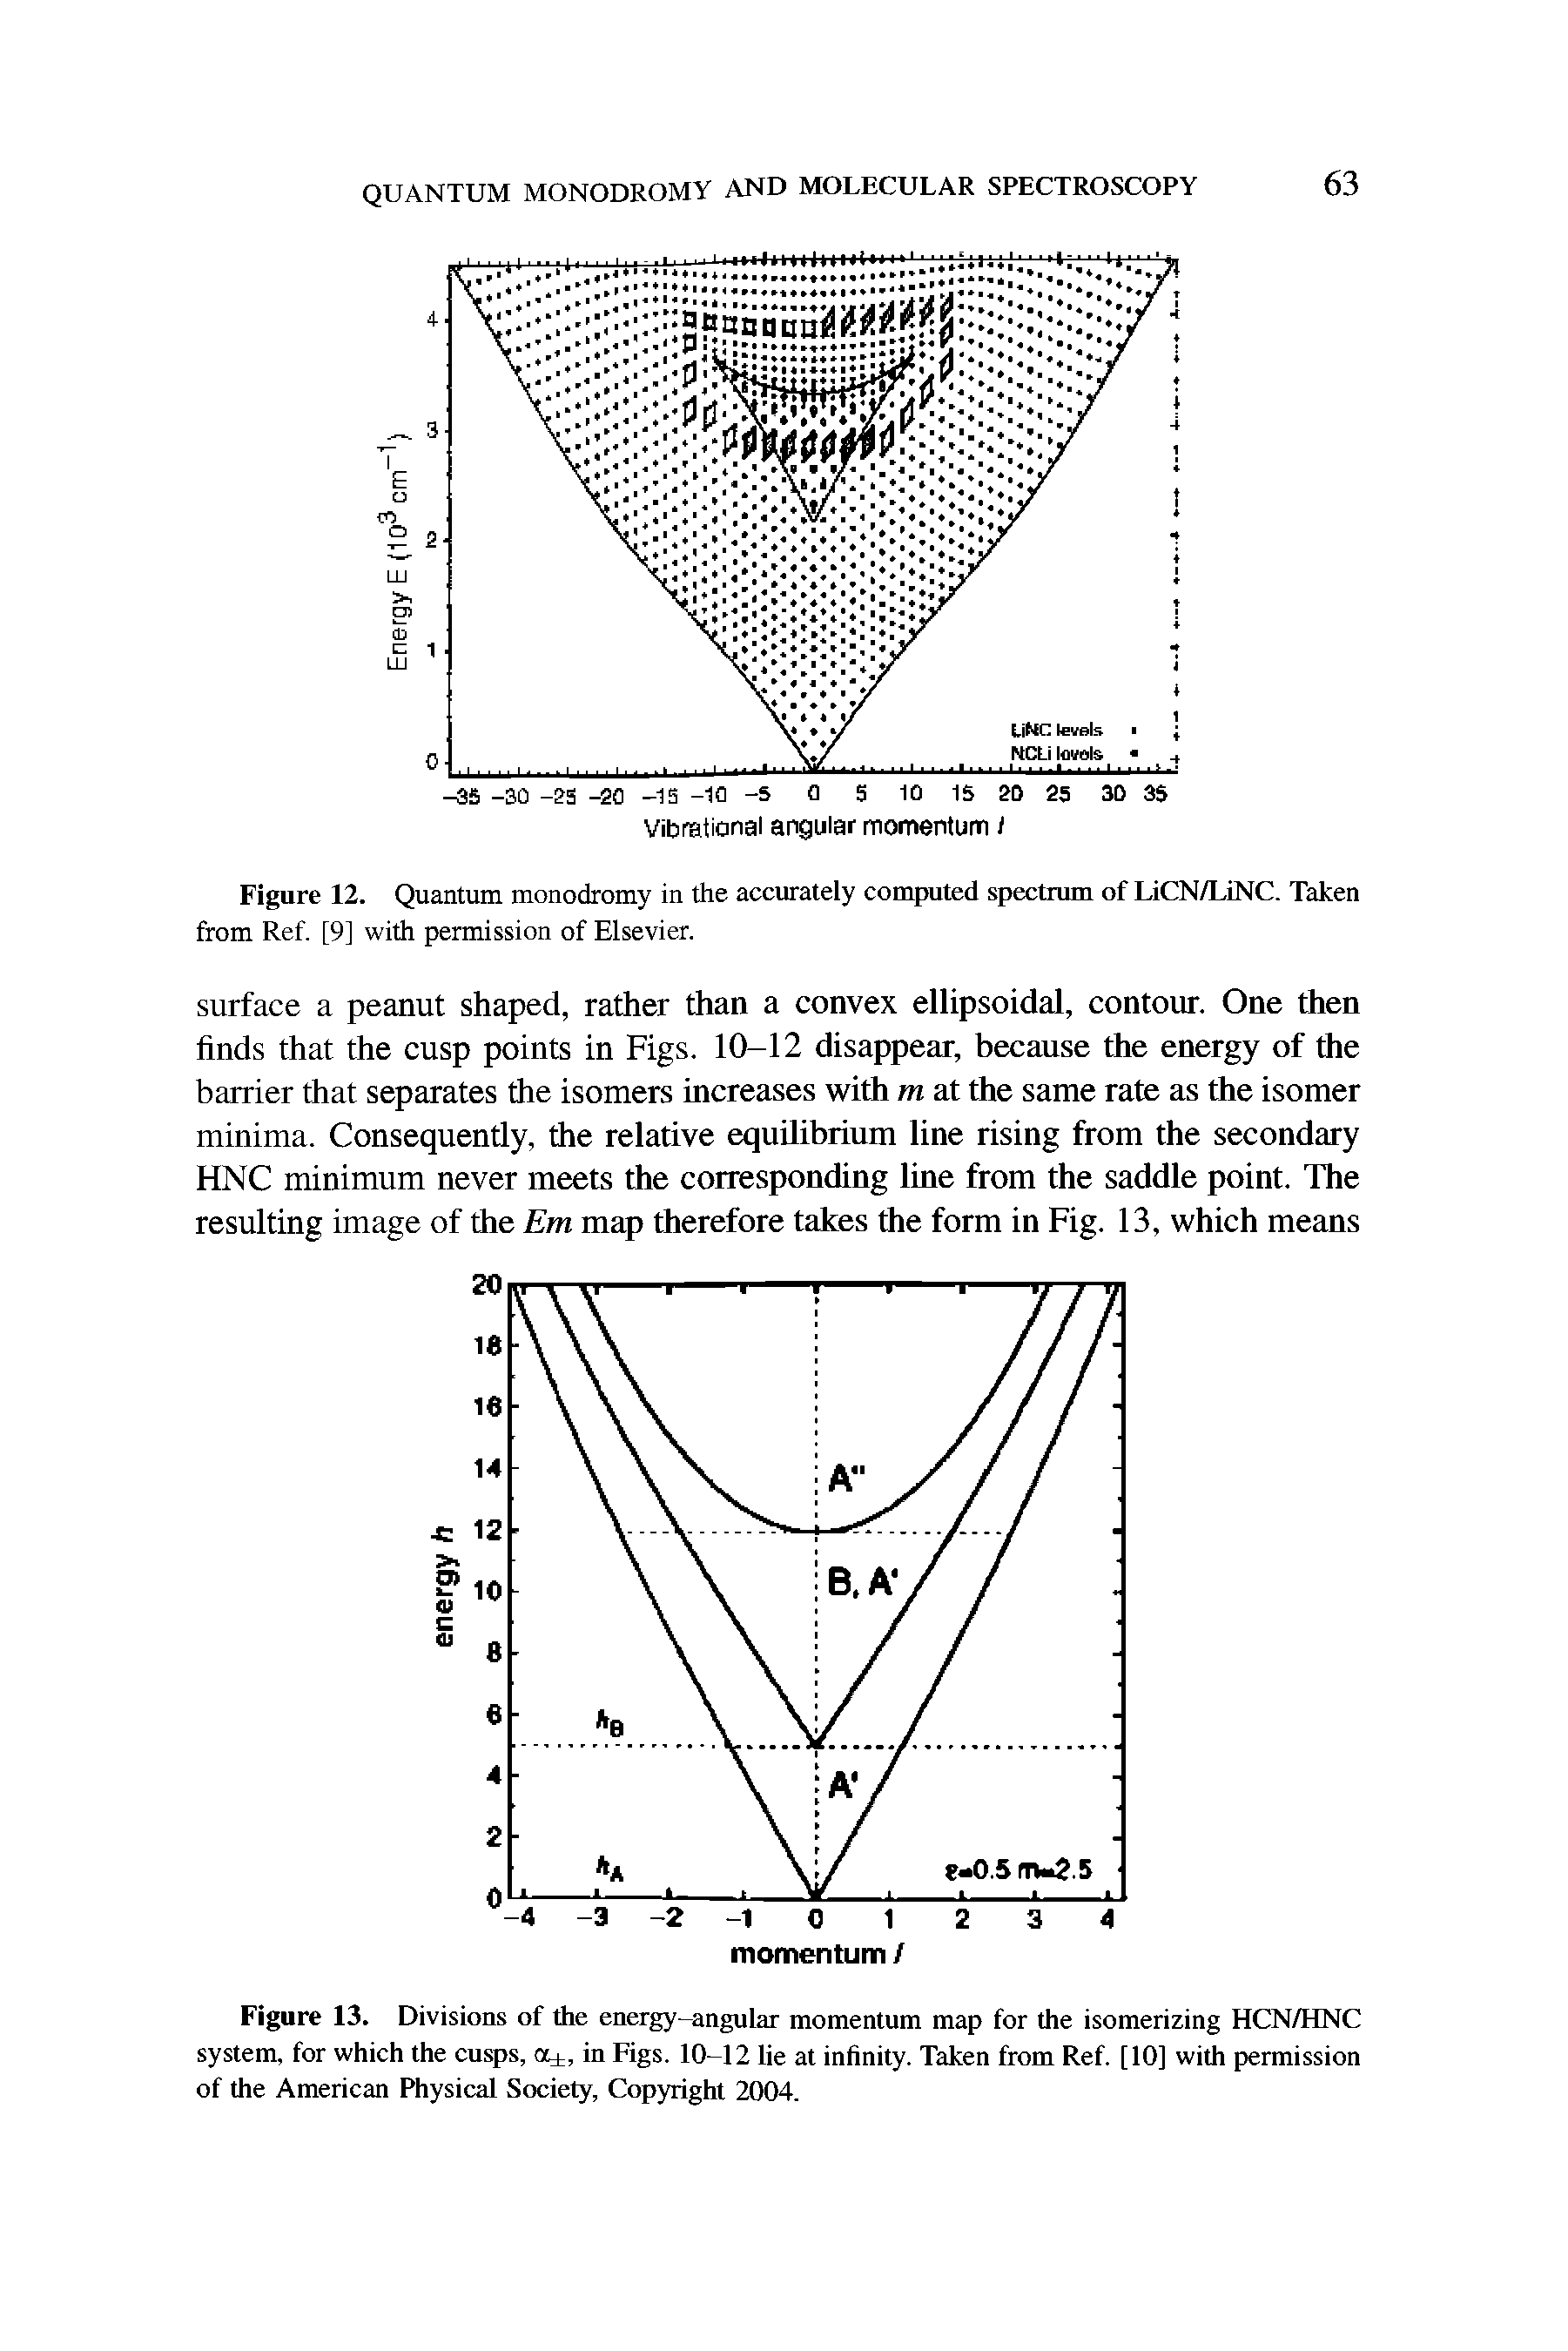 Figure 13. Divisions of the energy-angular momentum map for the isomerizing HCN/HNC system, for which the cusps, Oj., in Figs. 10-12 lie at infinity. Taken from Ref [10] with permission of the American Physical Society, Copyright 2004.